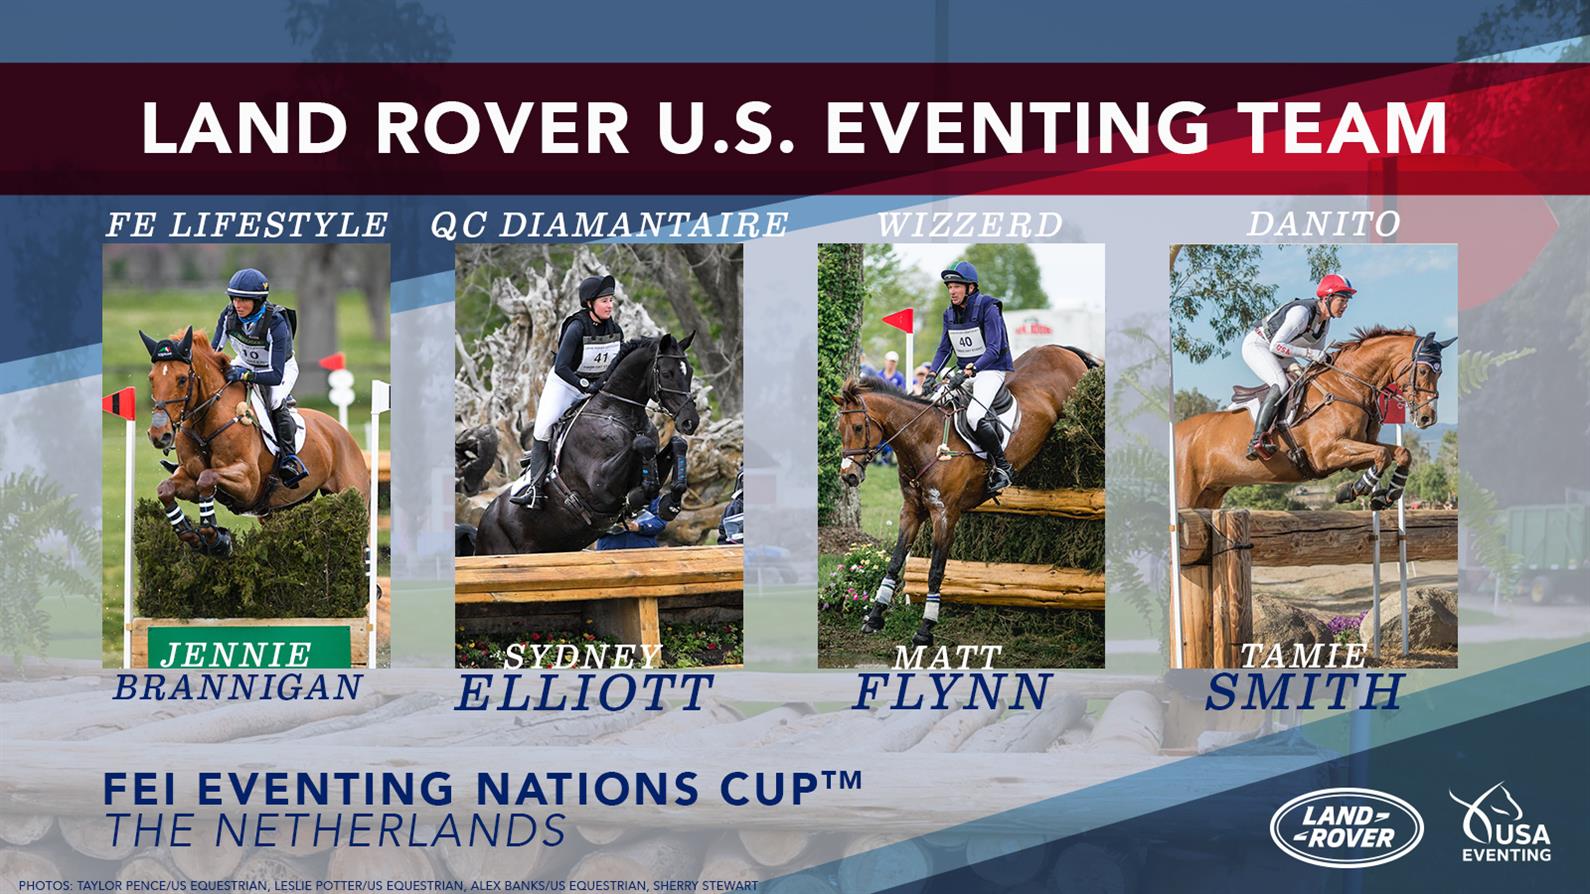 U.S. team for the Eventing Nations Cup in Boekelo, the Netherlands